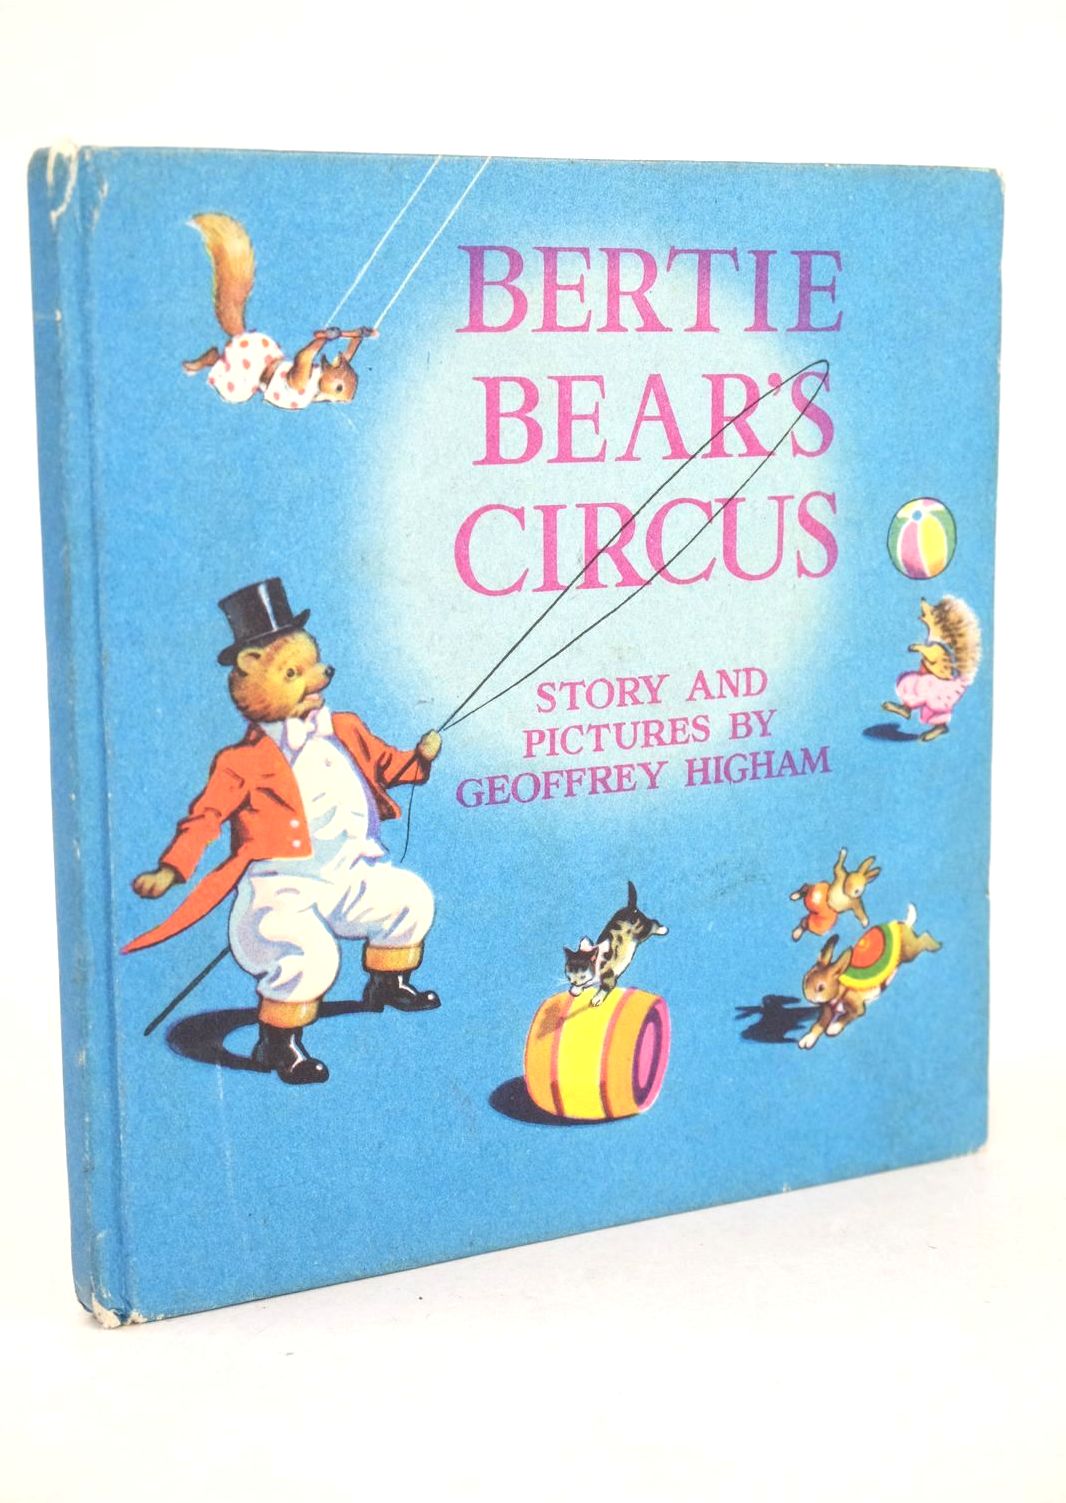 Photo of BERTIE BEAR'S CIRCUS written by Higham, Geoffrey illustrated by Higham, Geoffrey published by Edmund Ward (STOCK CODE: 1325530)  for sale by Stella & Rose's Books